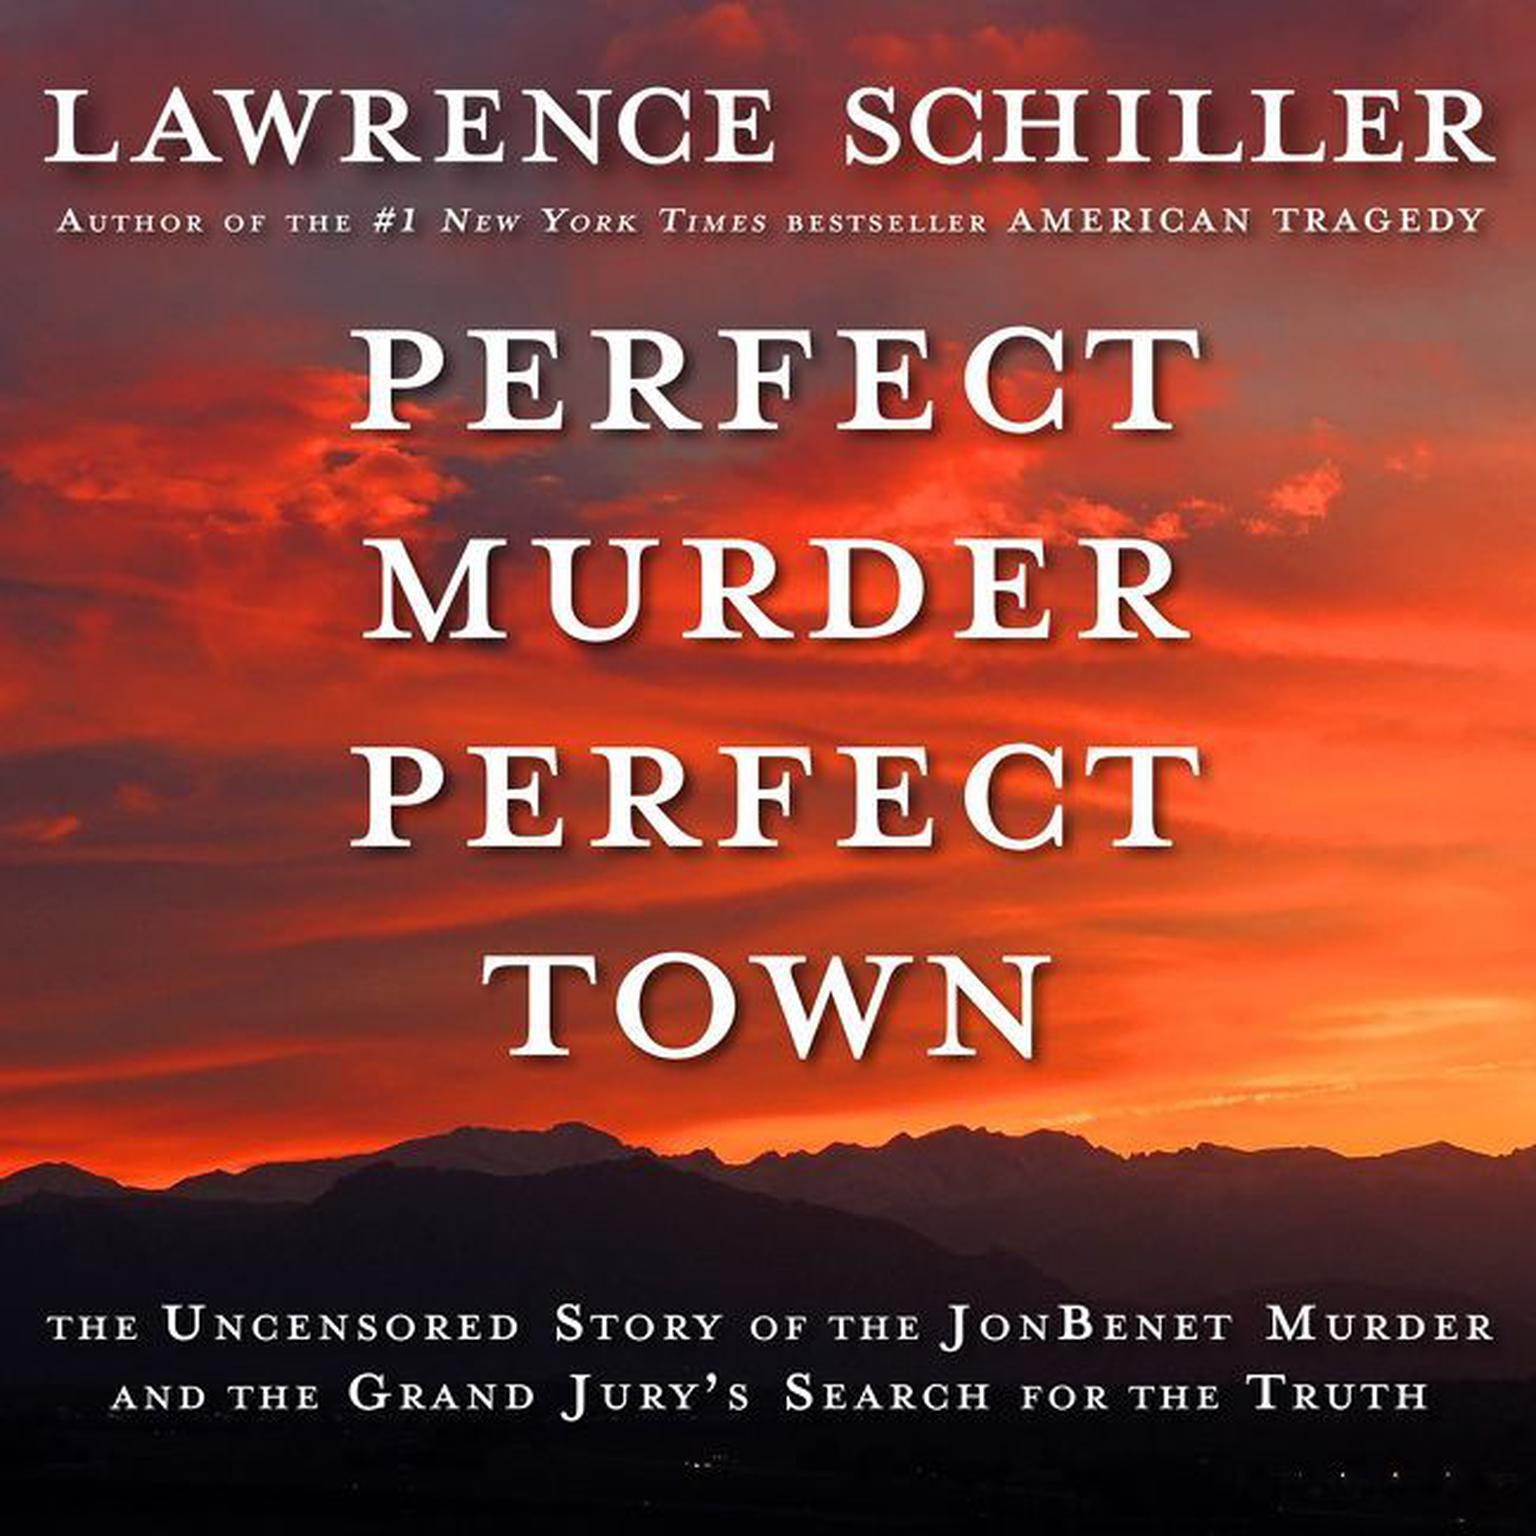 Perfect Murder, Perfect Town (Abridged): The Uncensored Story of the JonBenét Murder and the Grand Jury’s Search for the Truth Audiobook, by Lawrence Schiller